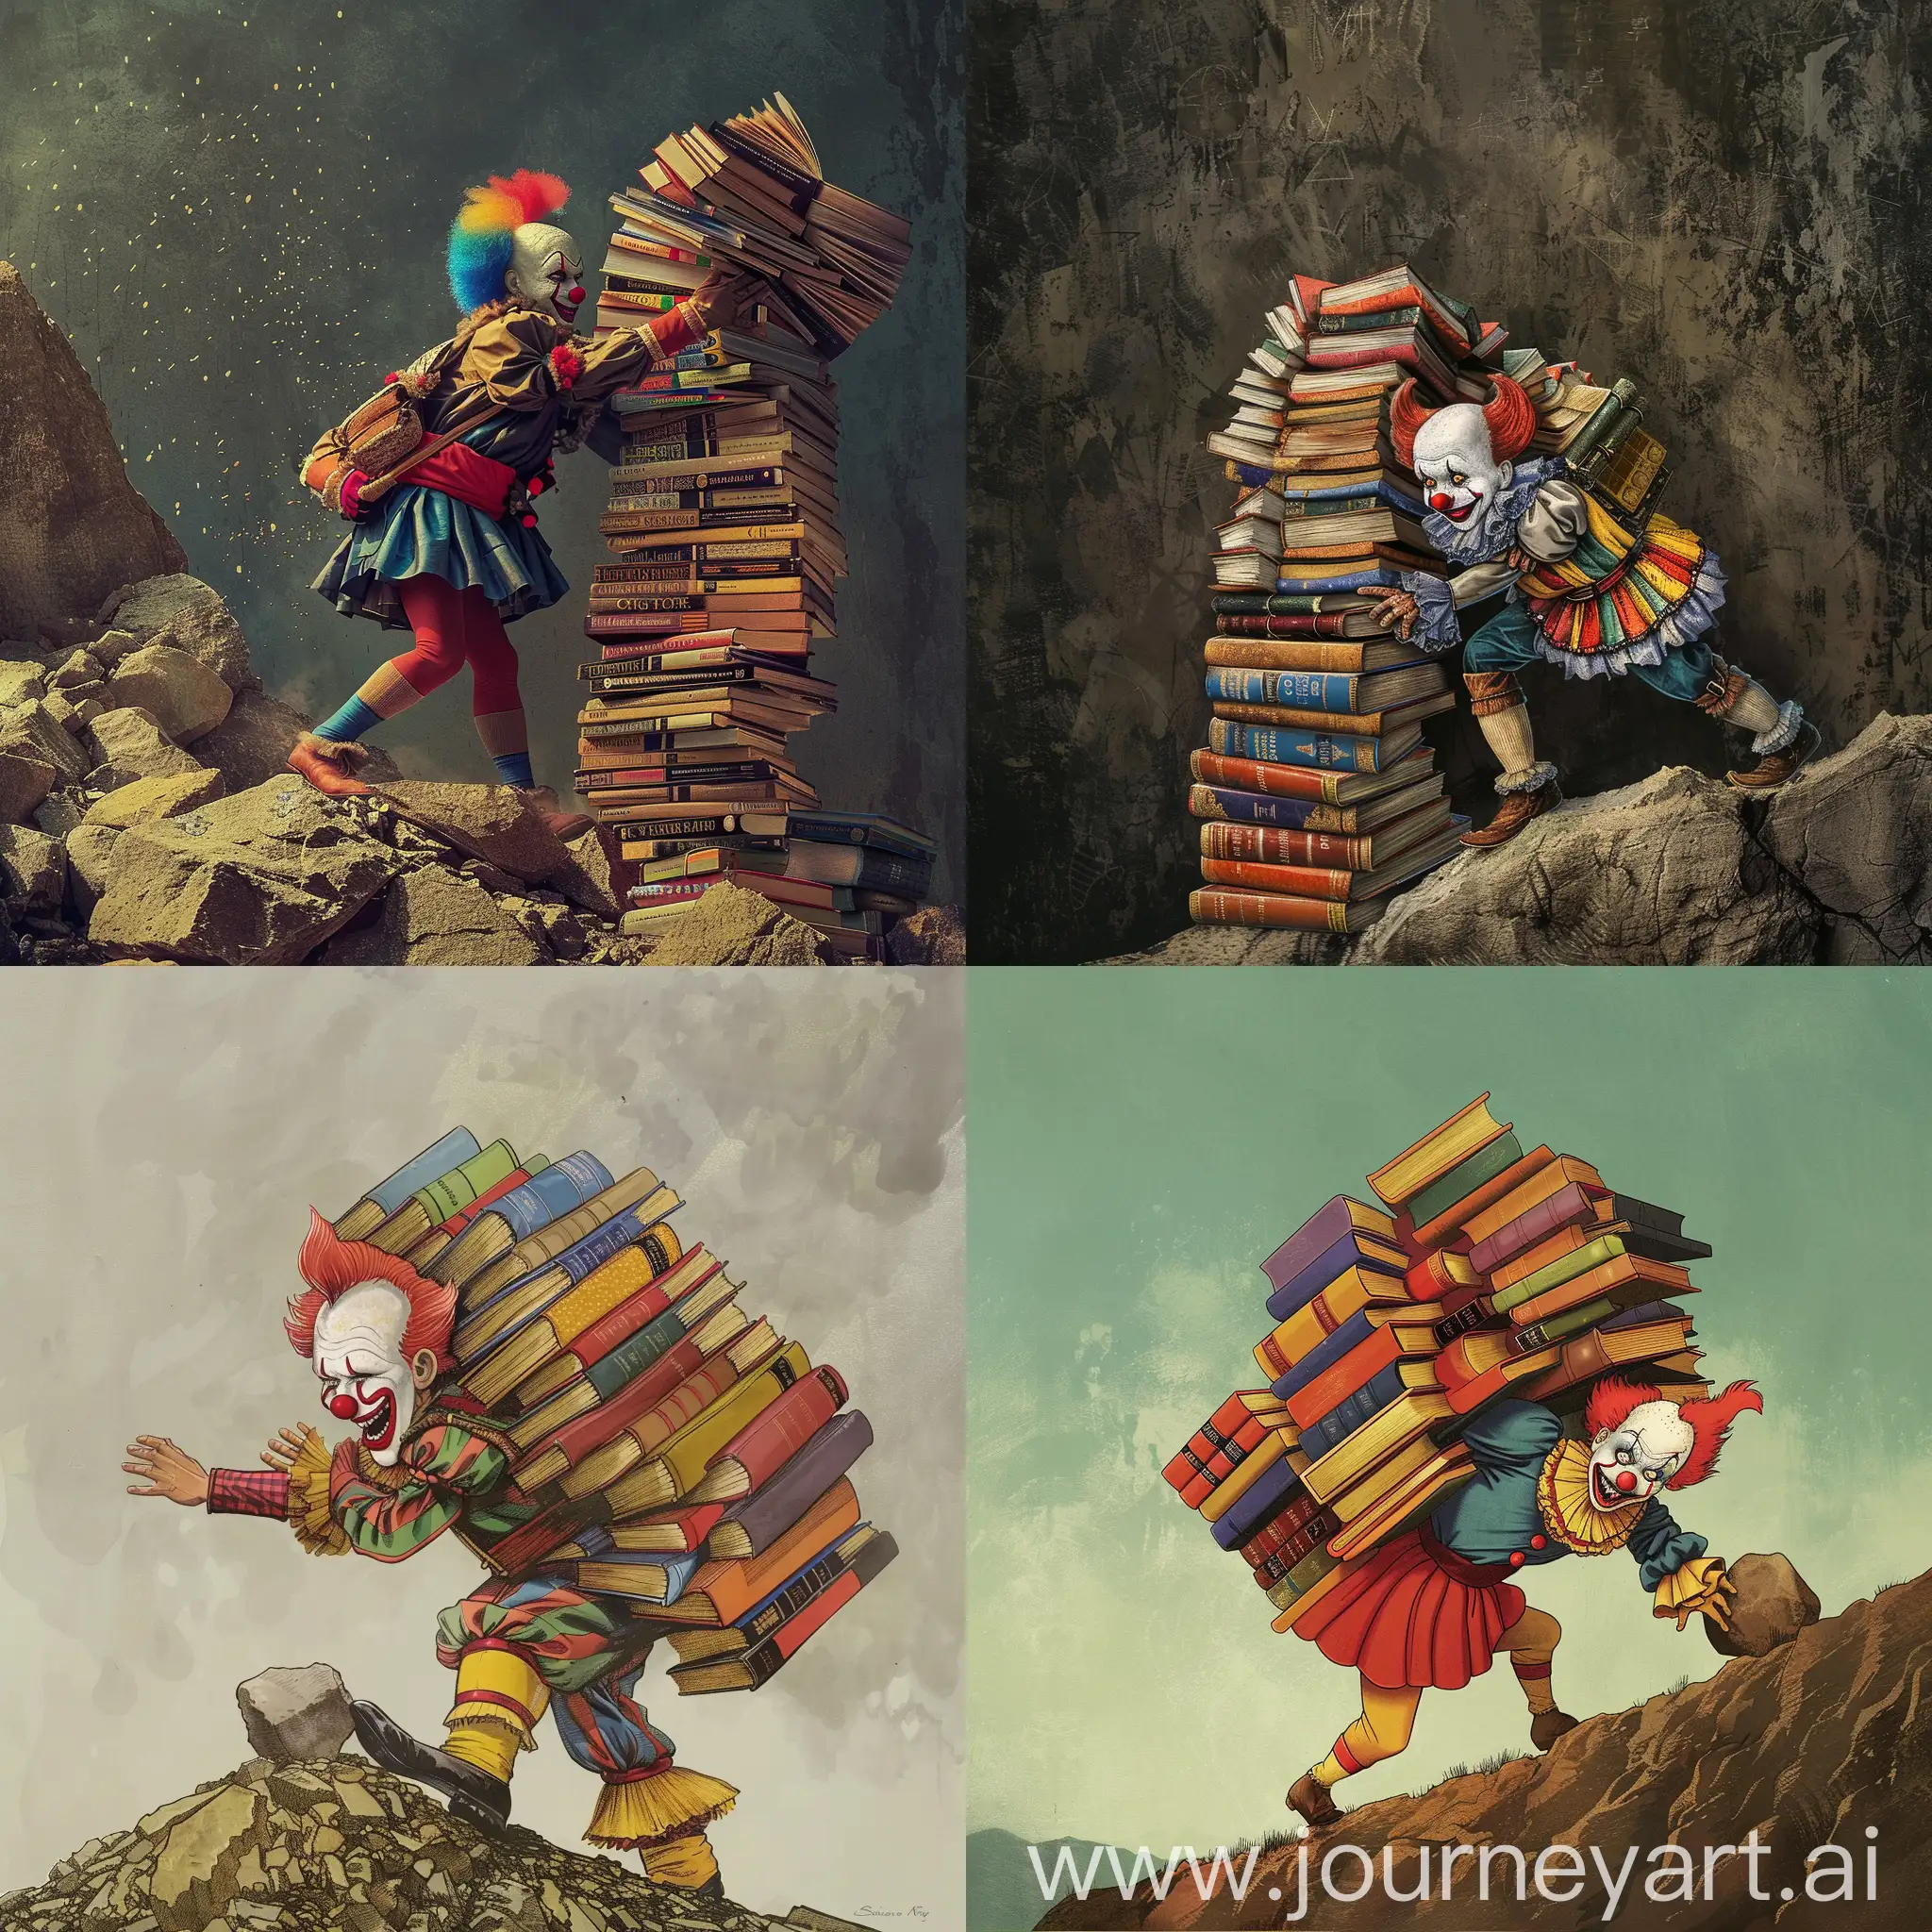 Cheerful-Clown-Juggling-Colorful-Books-on-an-Uphill-Journey